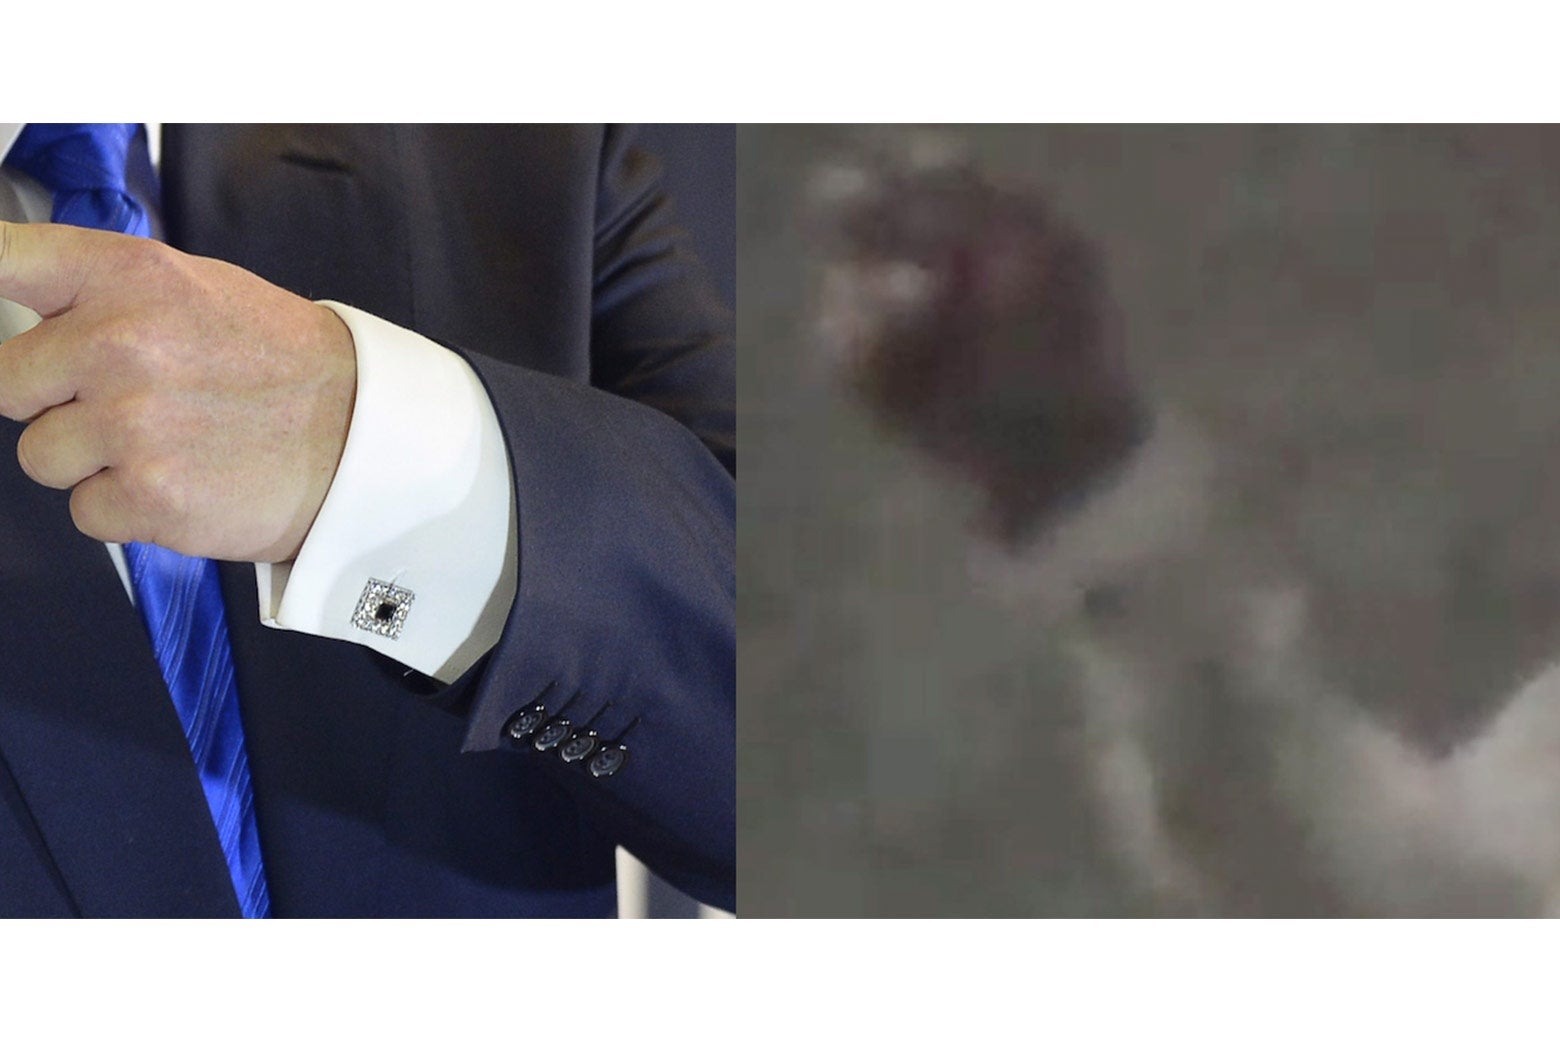 Side-by-side photo illustration of Trump's cufflinks in the Miss Universe 2013 photo and the Trump-like figure from the video.